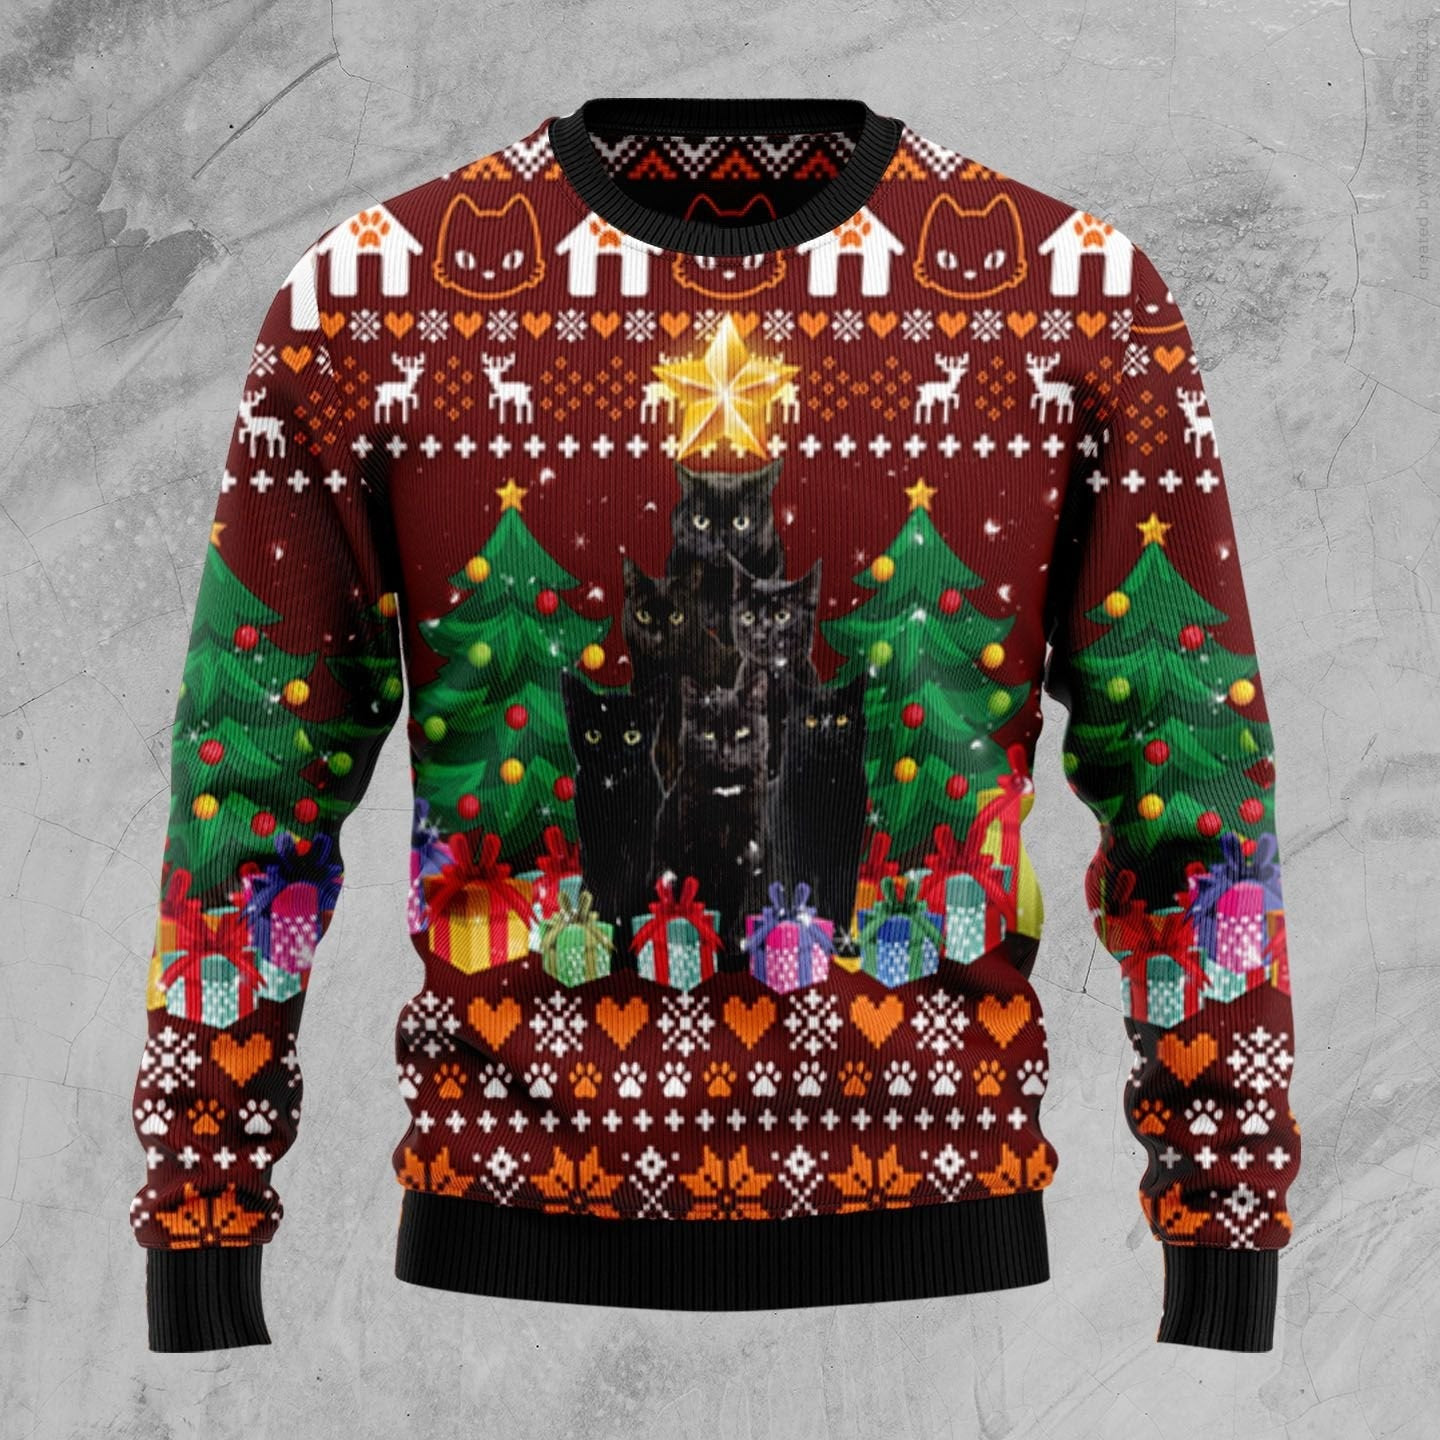 Black Cat Pine Tree Ugly Christmas Sweater, Ugly Sweater For Men Women, Holiday Sweater